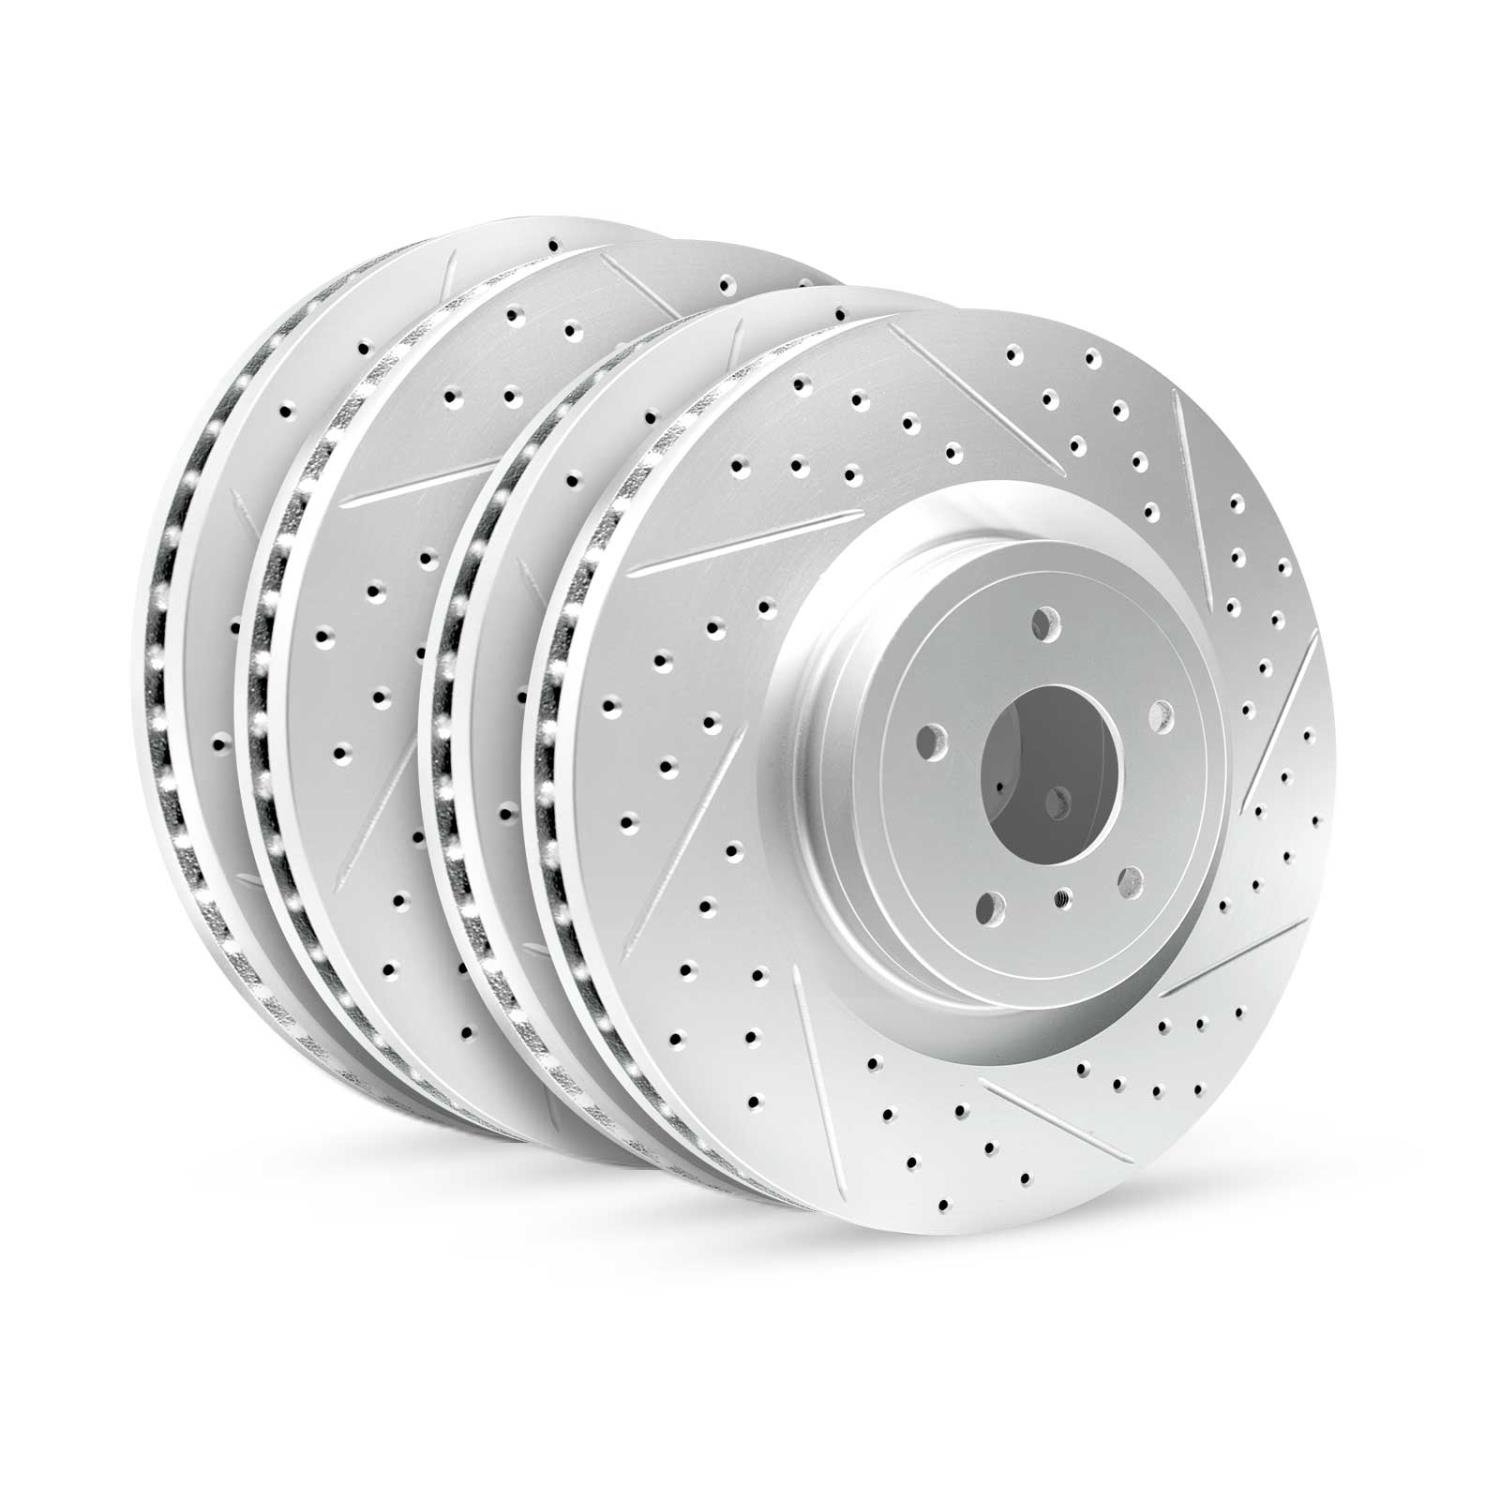 GEO-Carbon Drilled/Slotted Rotors, 2007-2008 BMW, Position: Front/Rear